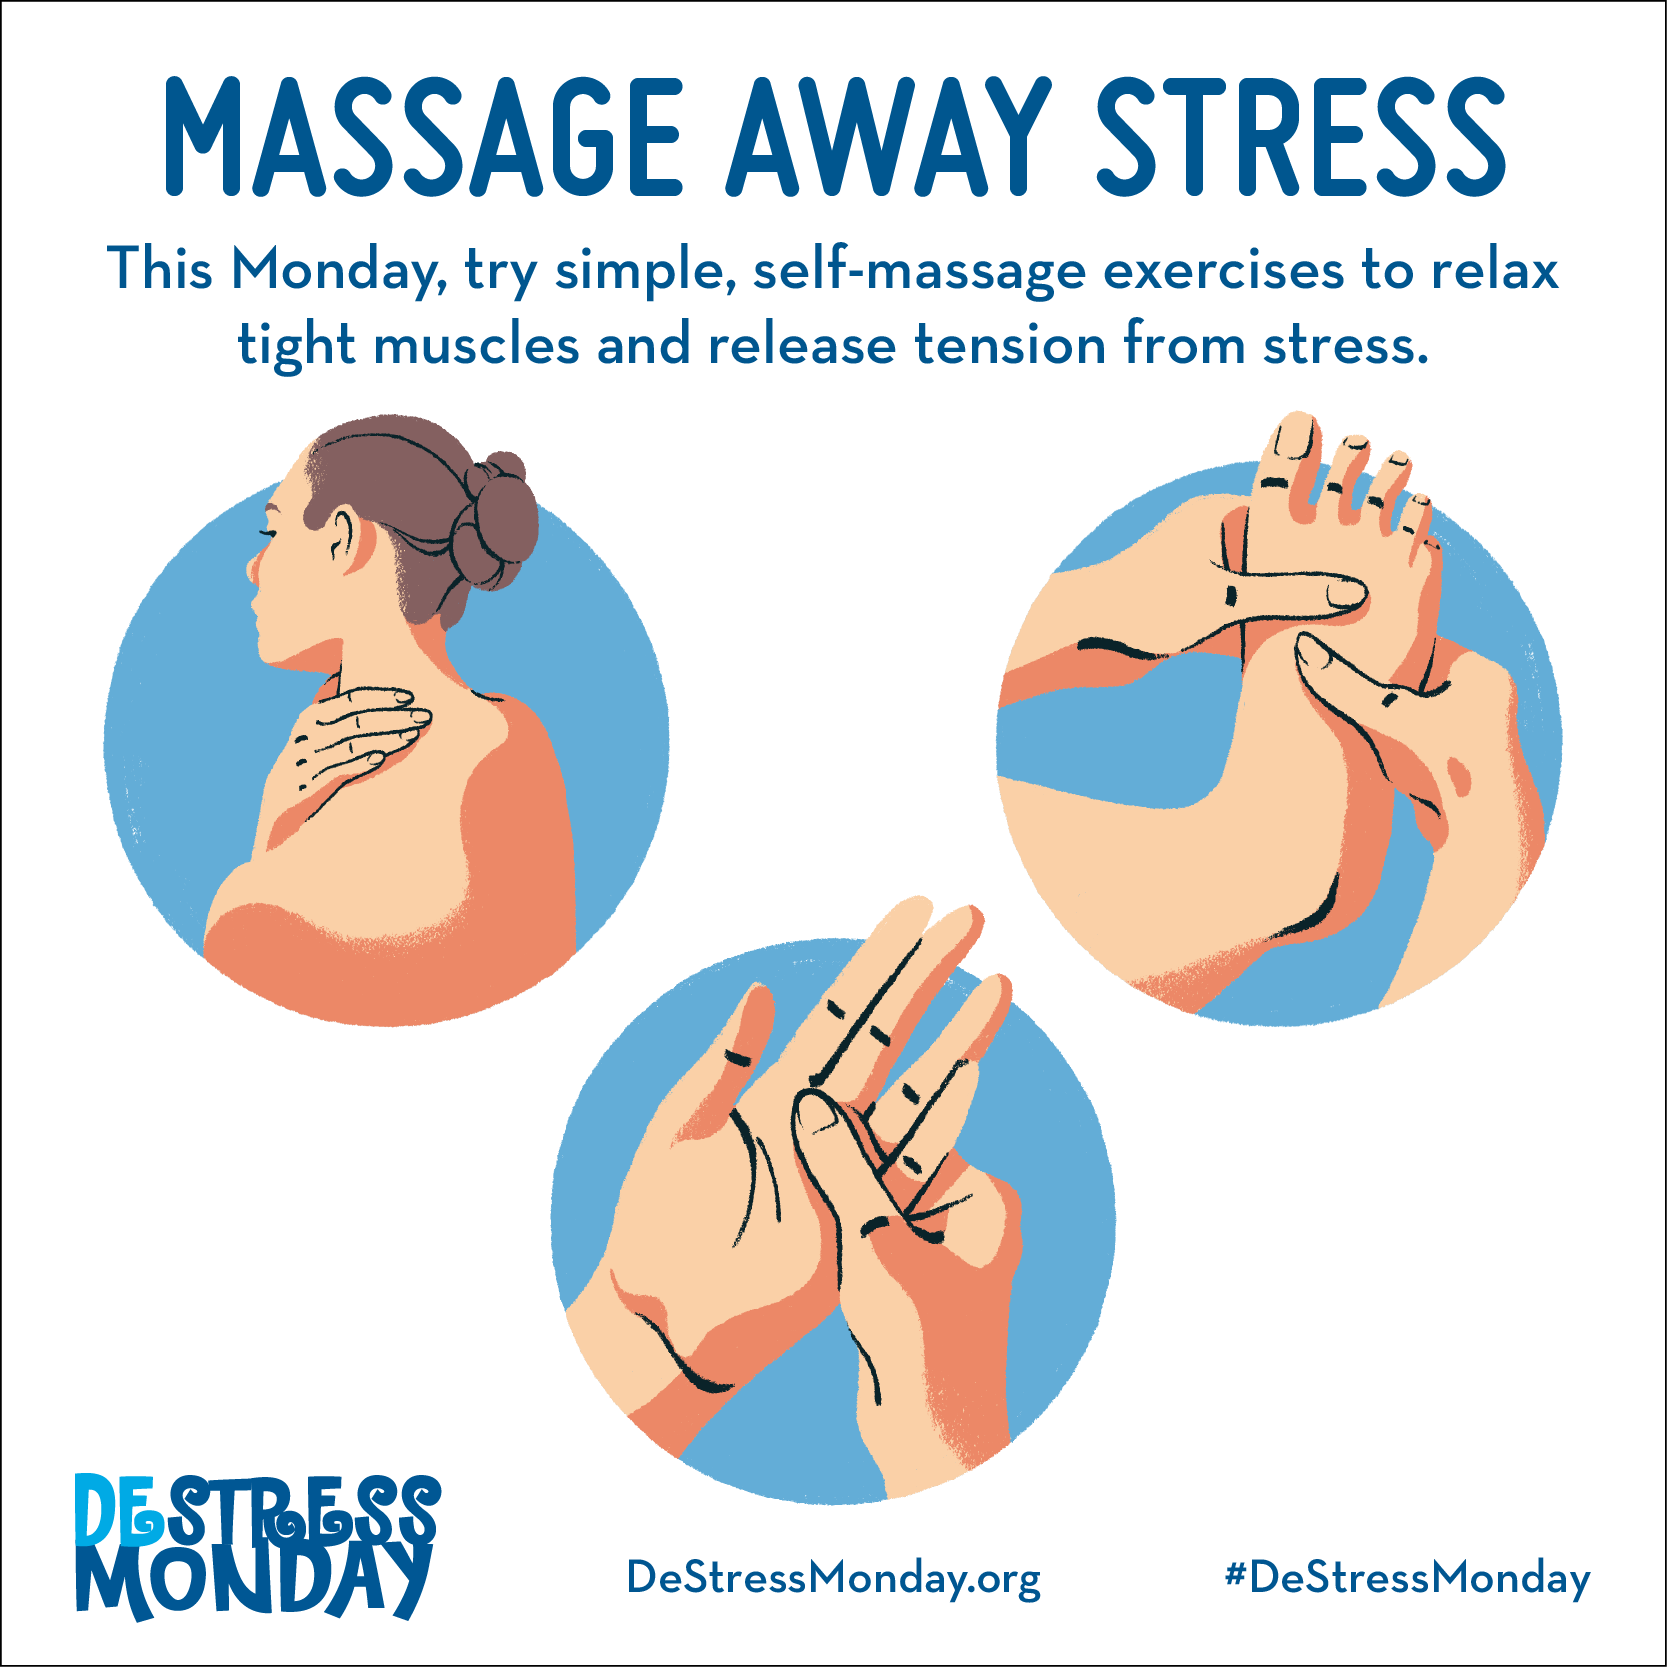 How Does Massage Therapy Reduce Stress